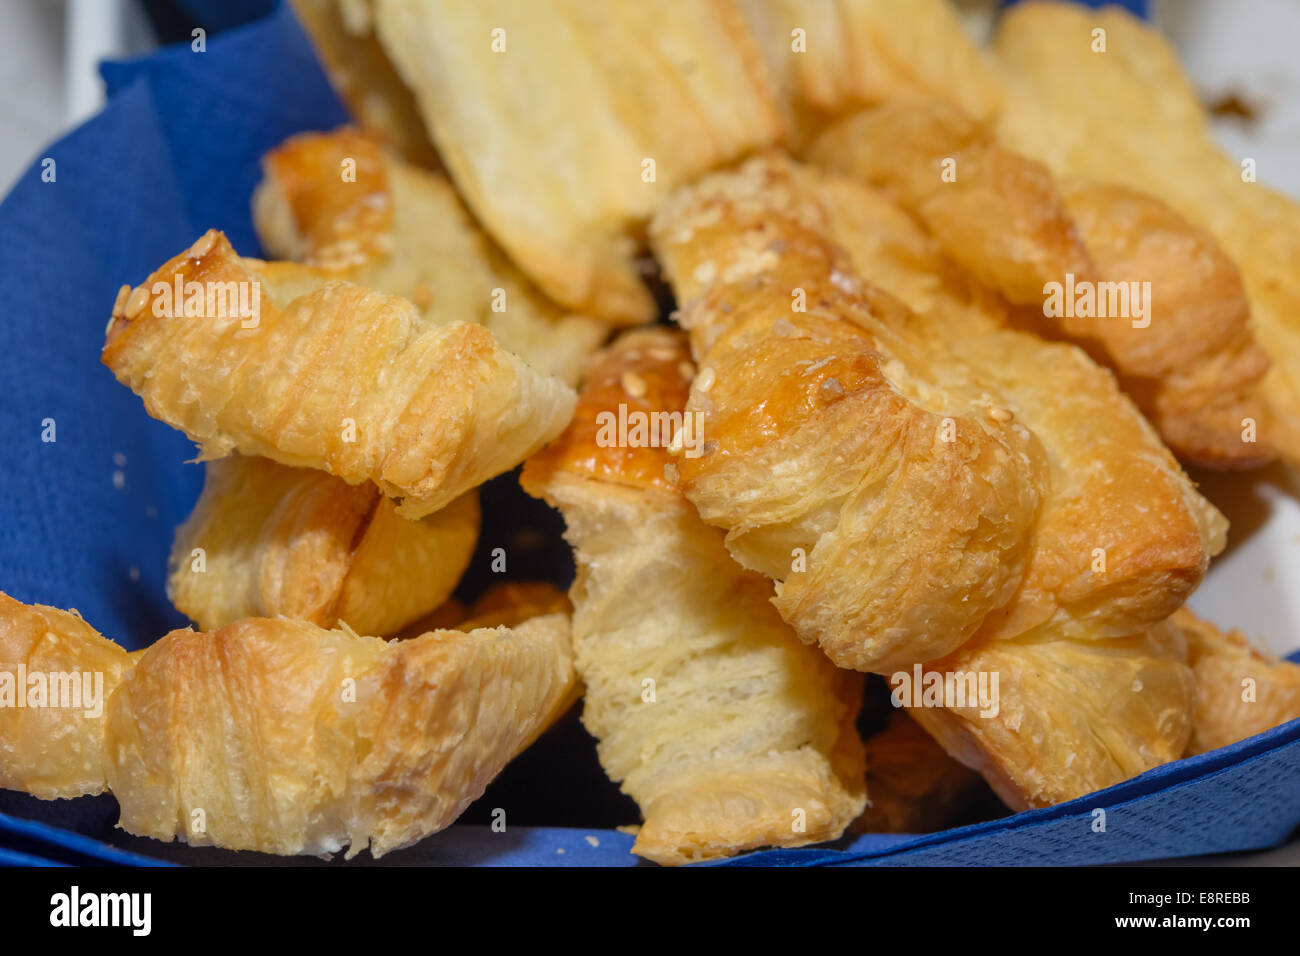 Delicious fresh pastries for breakfast or snack Stock Photo